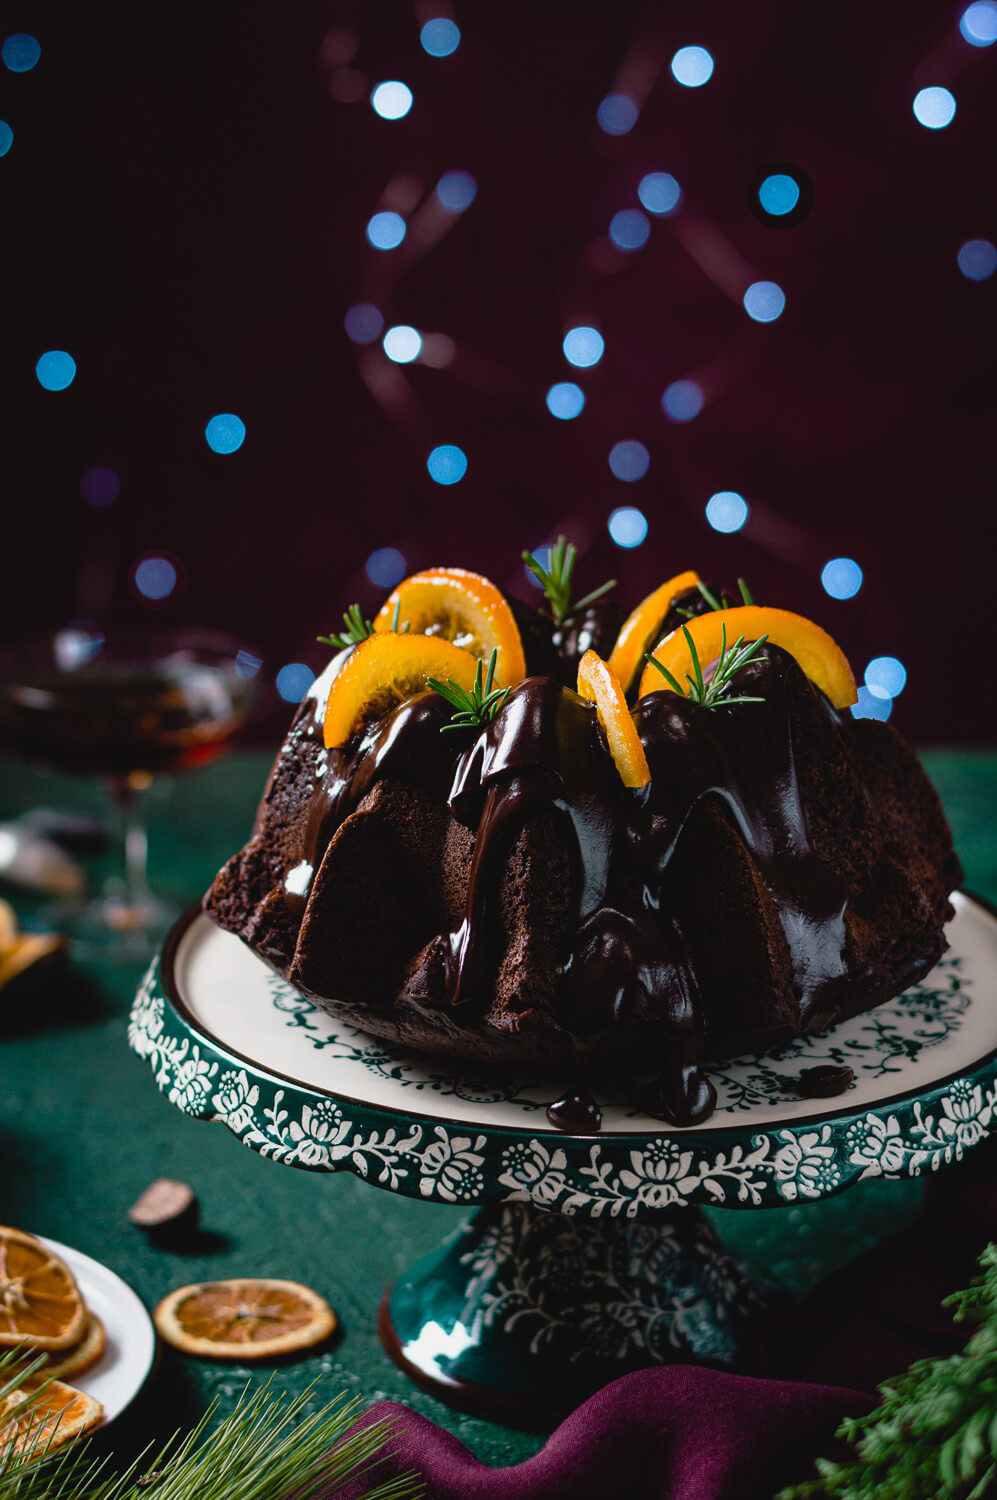 carob and bundt cake covered in chocolate ganache and decorated with candied orange slices